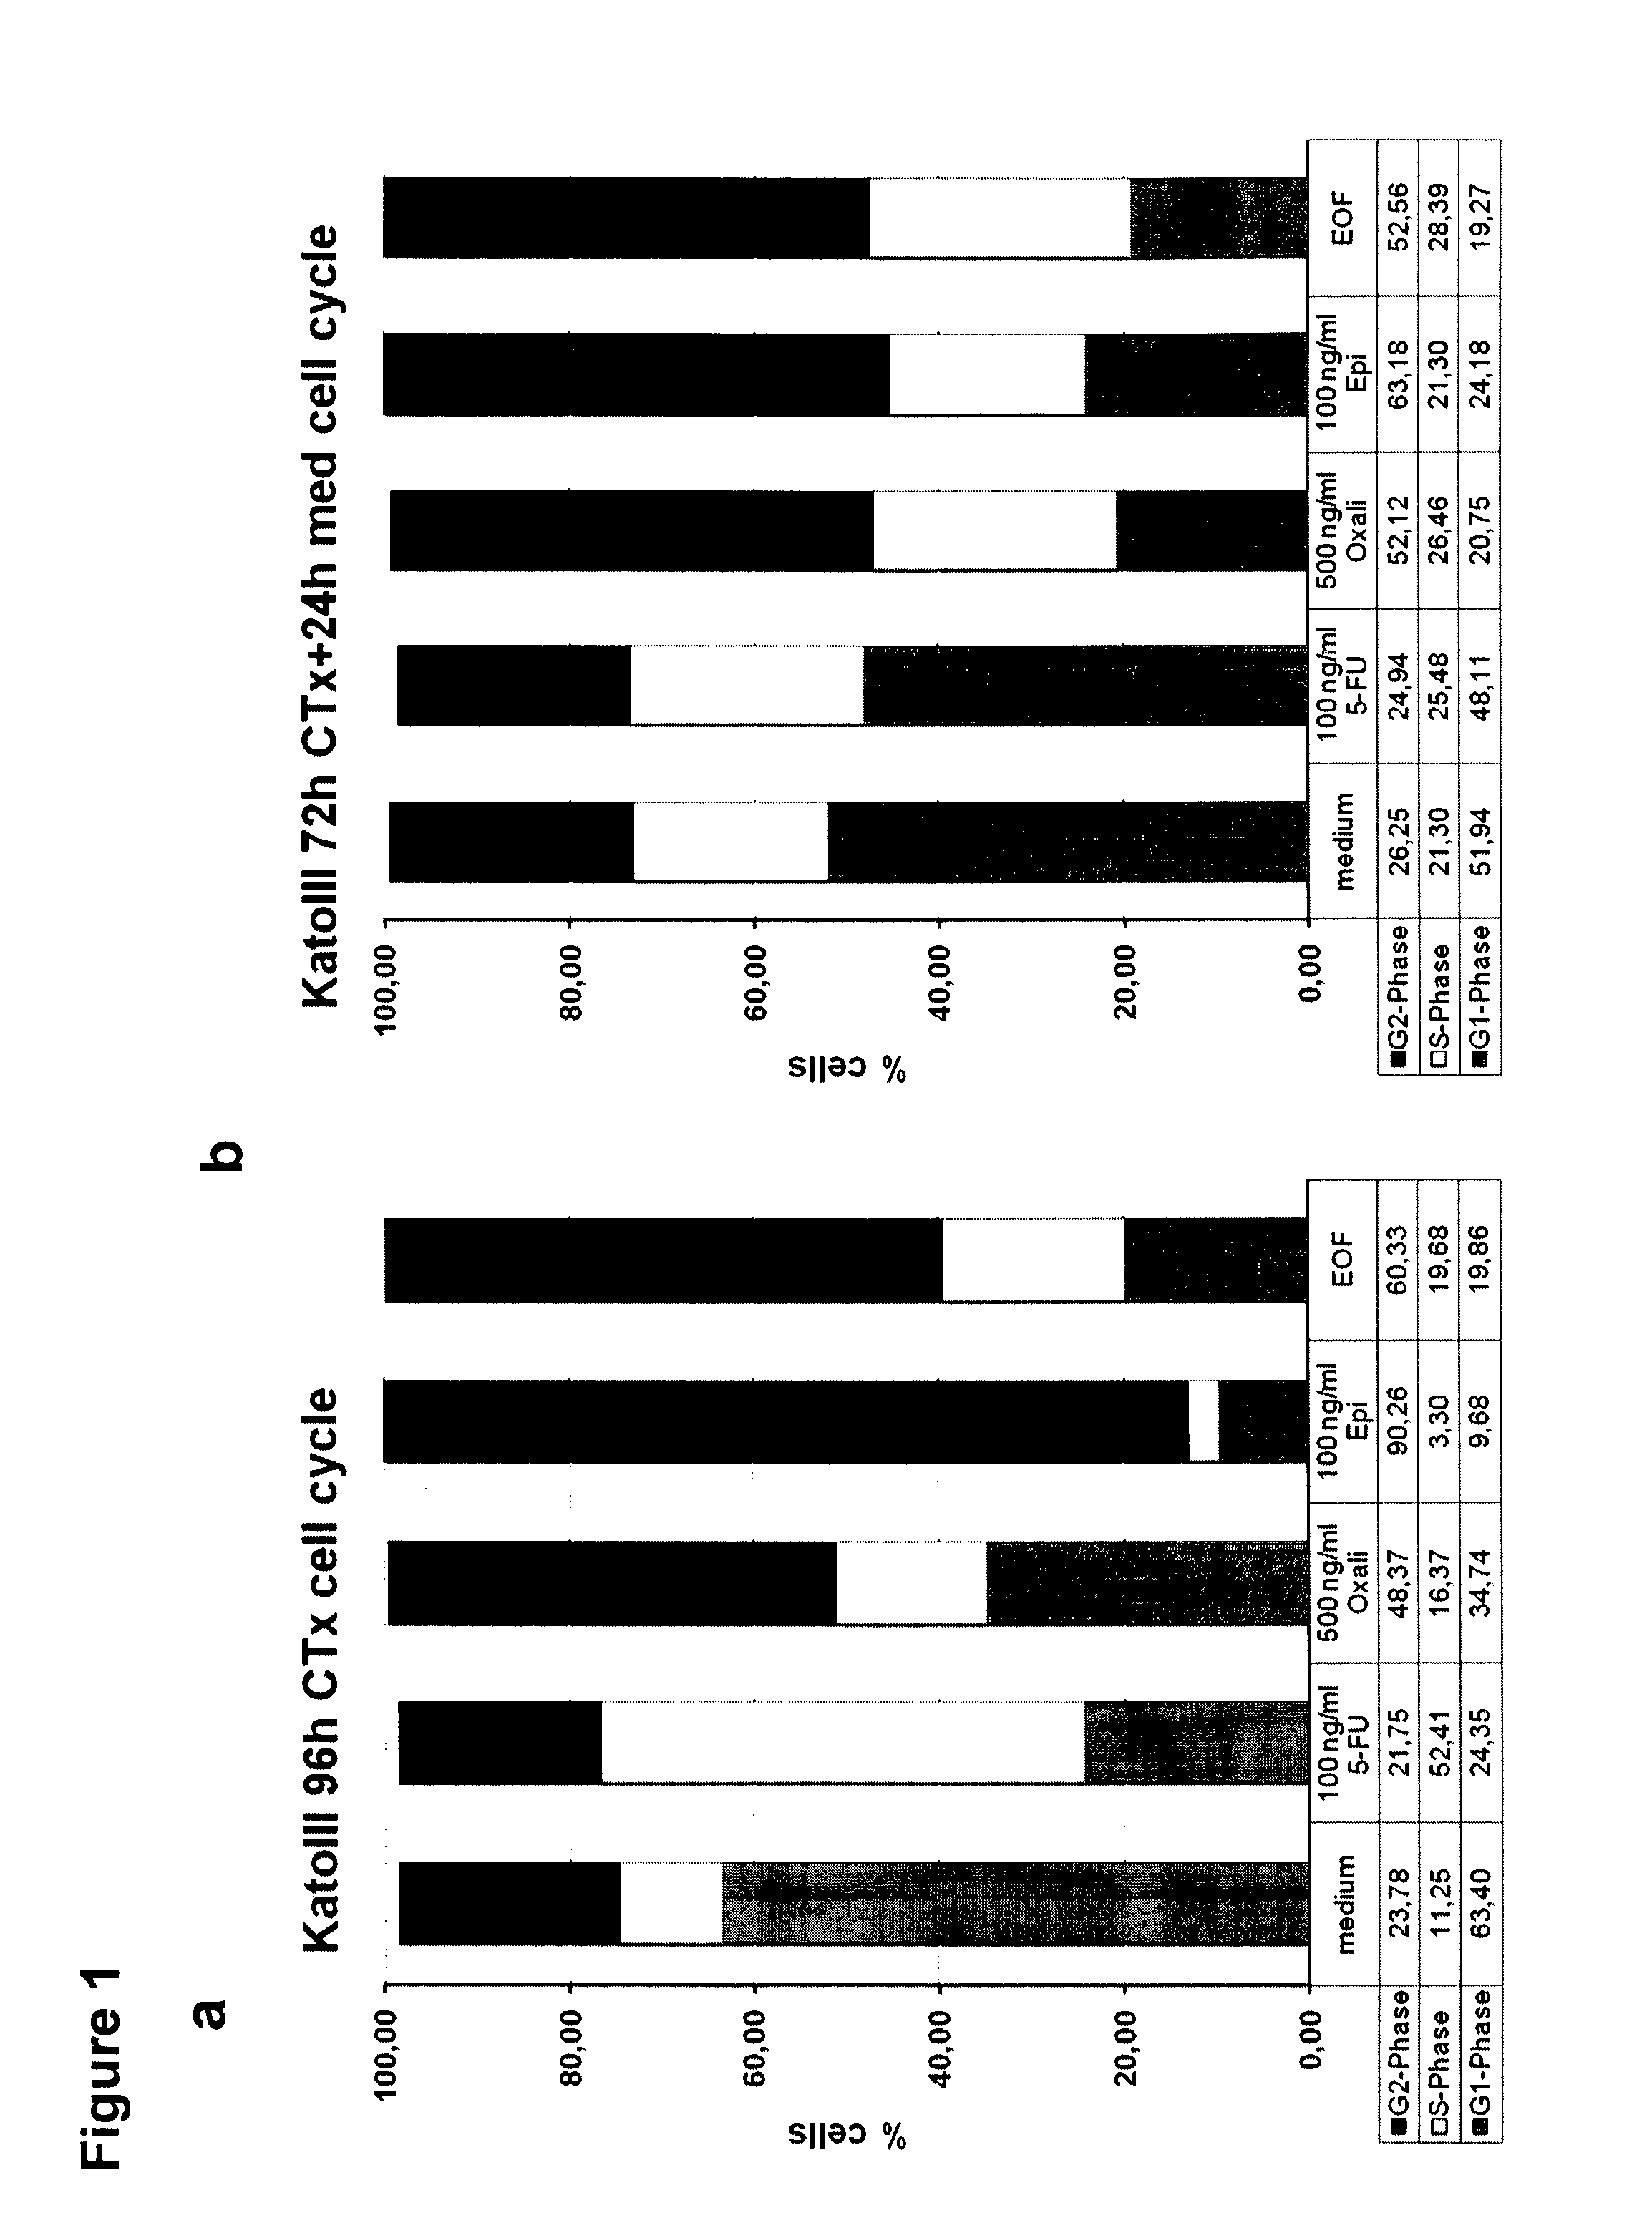 Combination therapy involving antibodies against claudin 18.2 for treatment of cancer